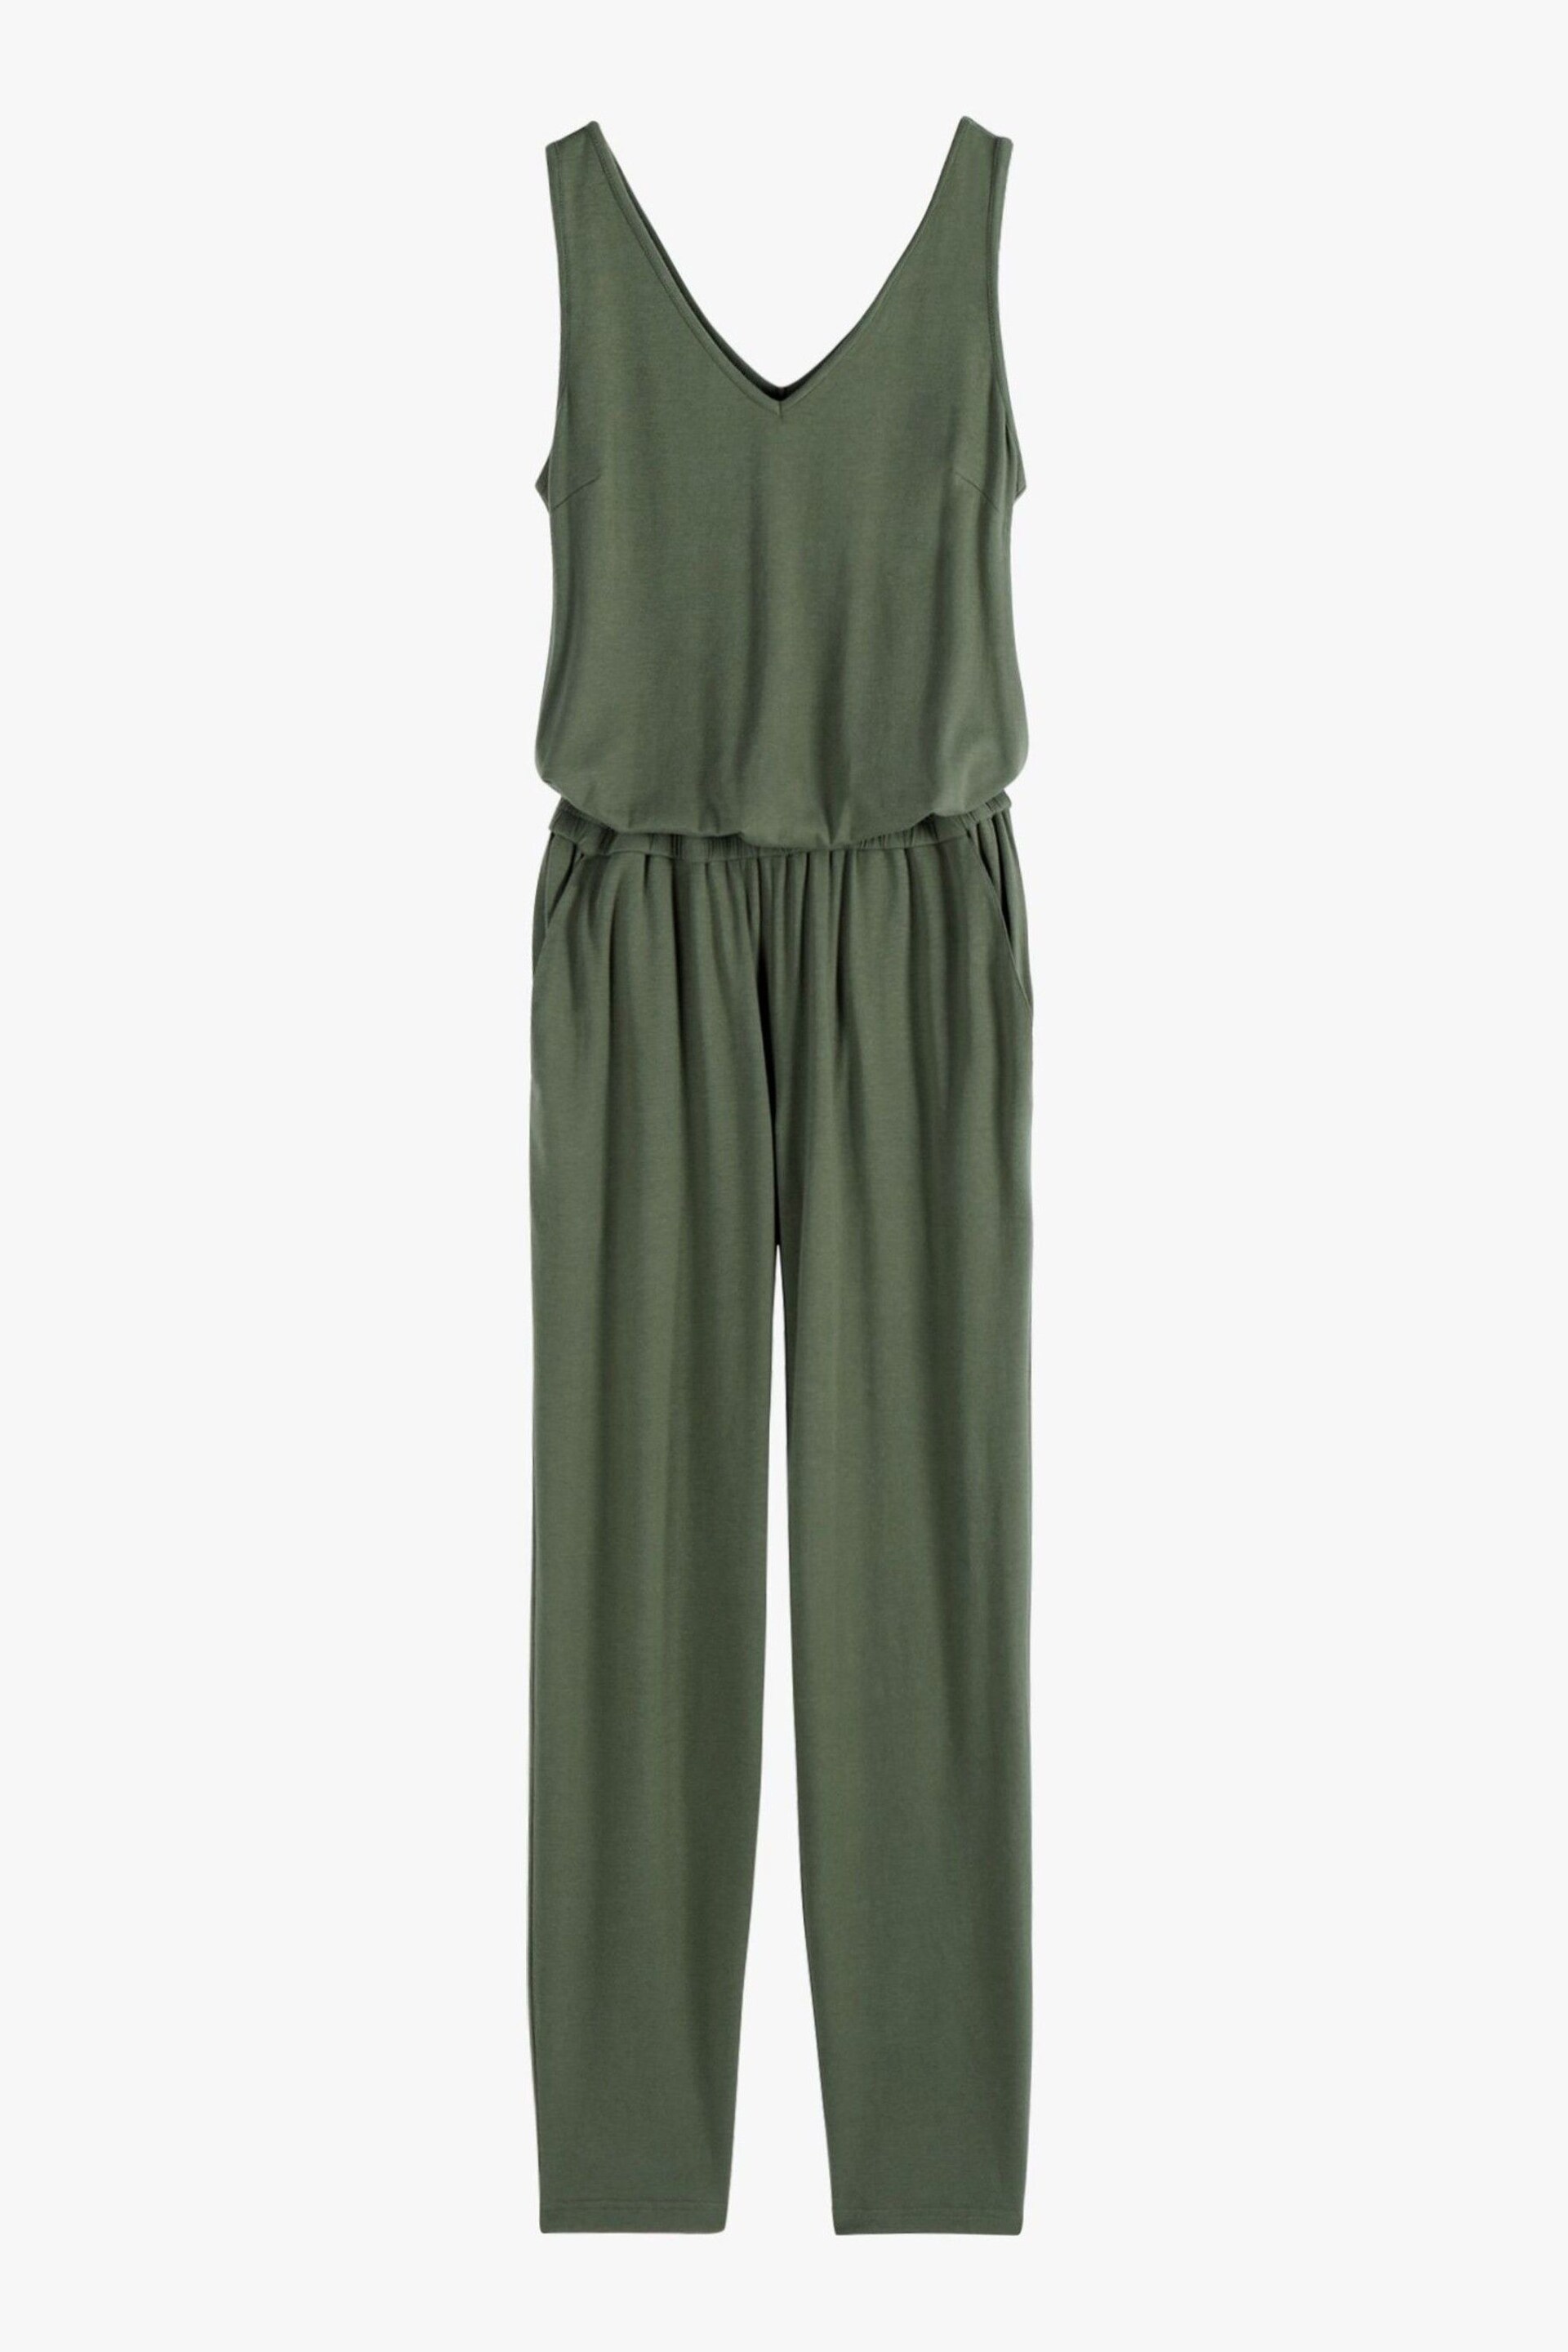 Hush Green Cropped Jersey Jumpsuit - Image 5 of 5